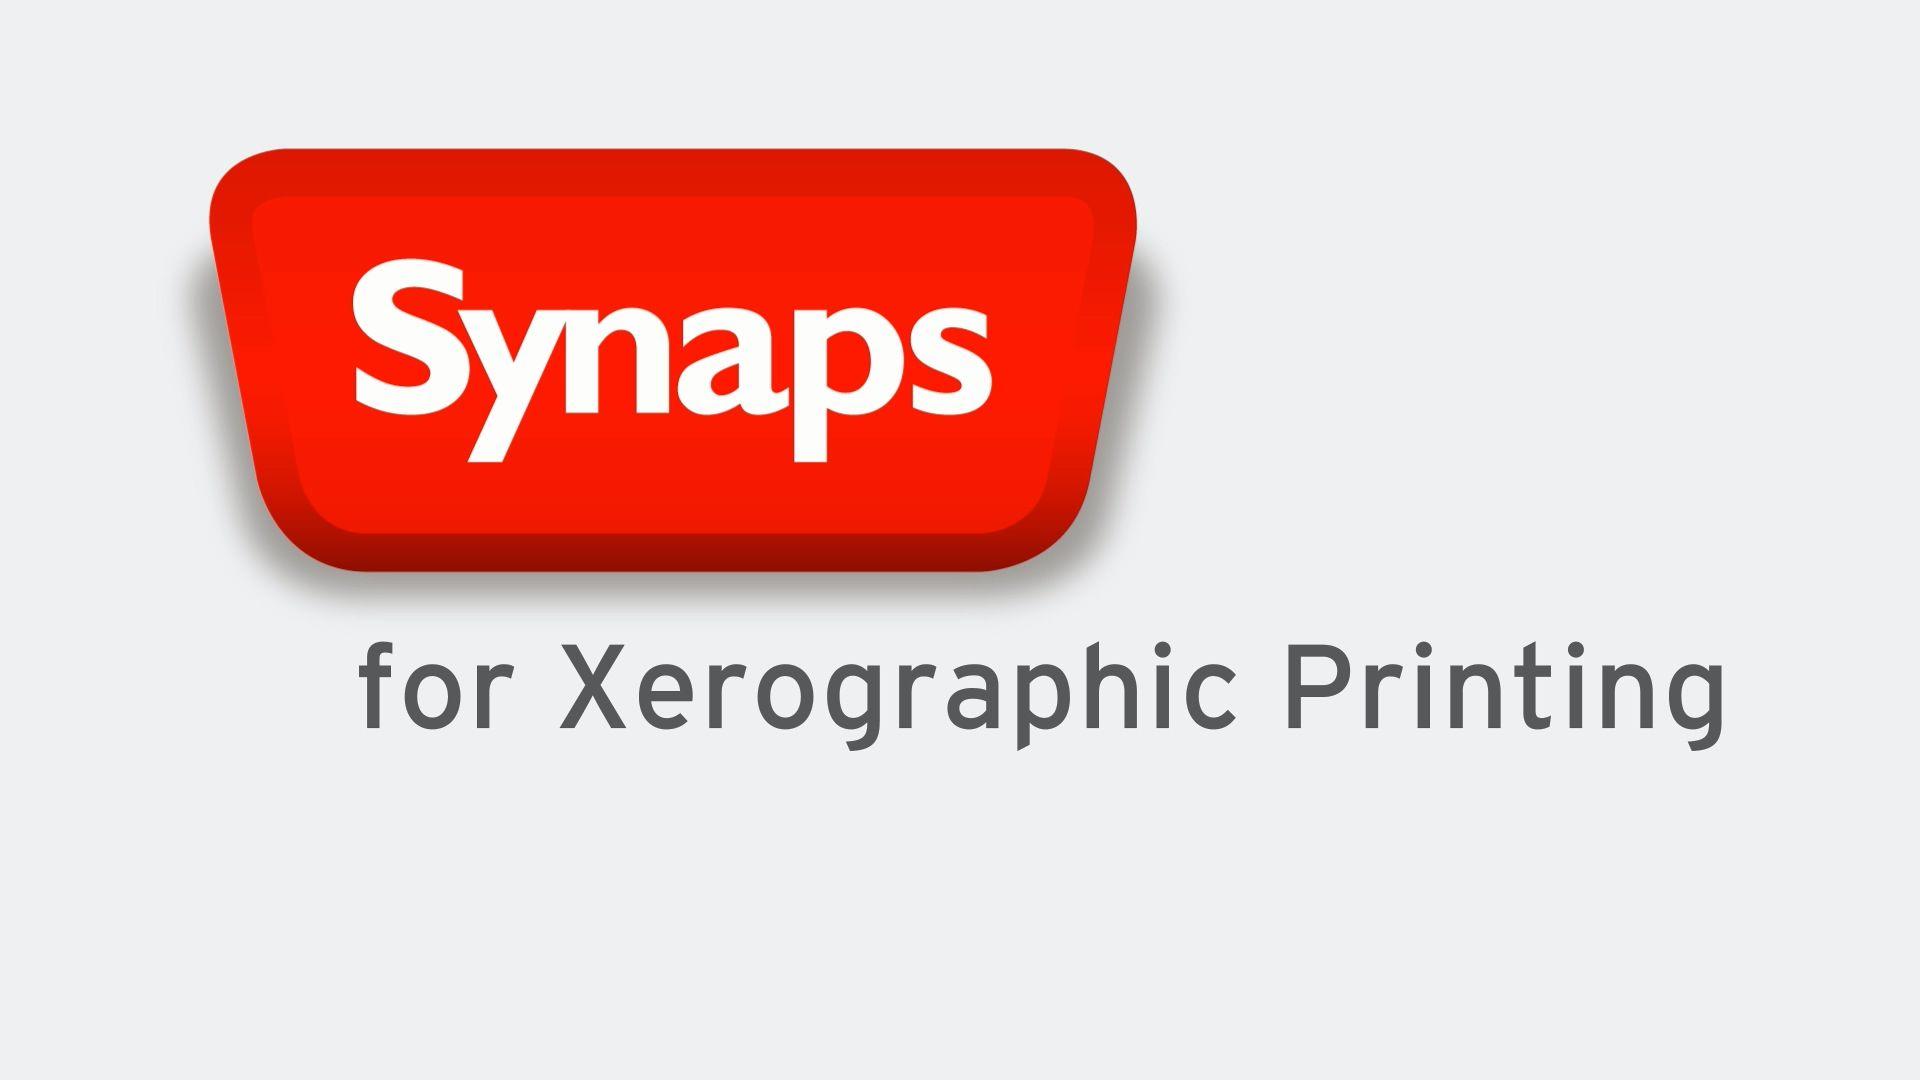 Agfa Logo - SYNAPS XM - Specialty Products